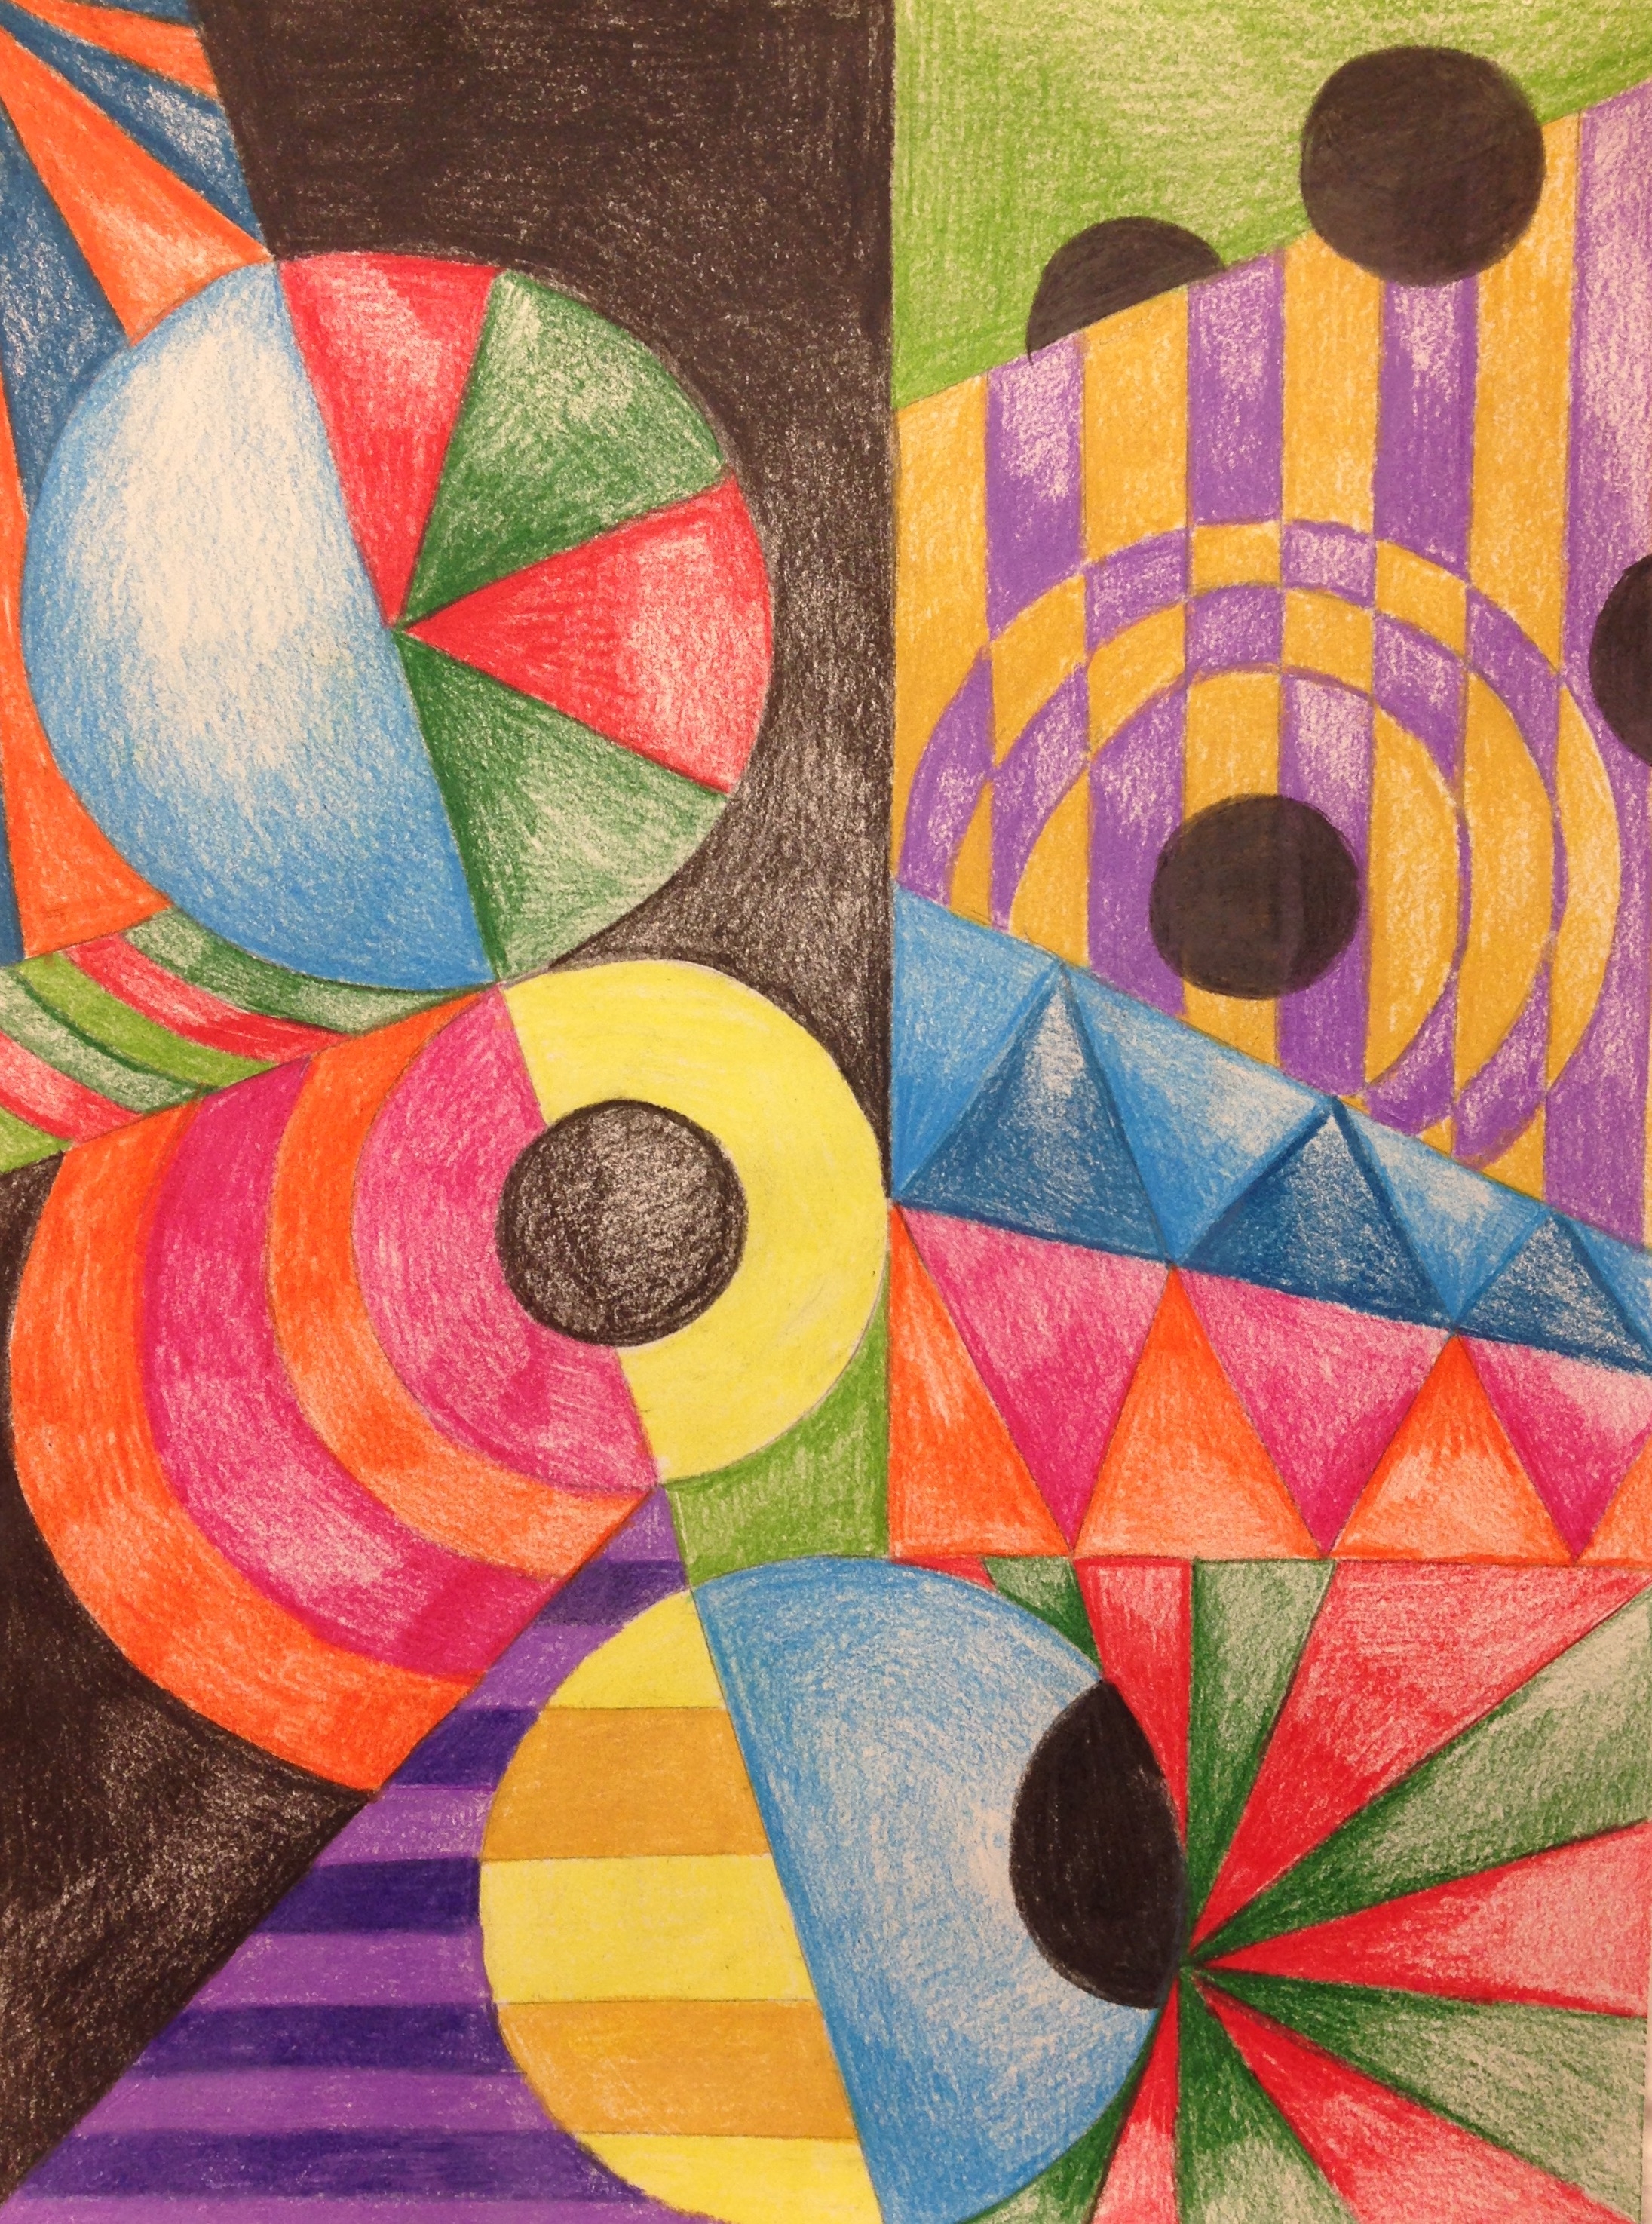 Colorful drawing featuring shapes and geometric forms